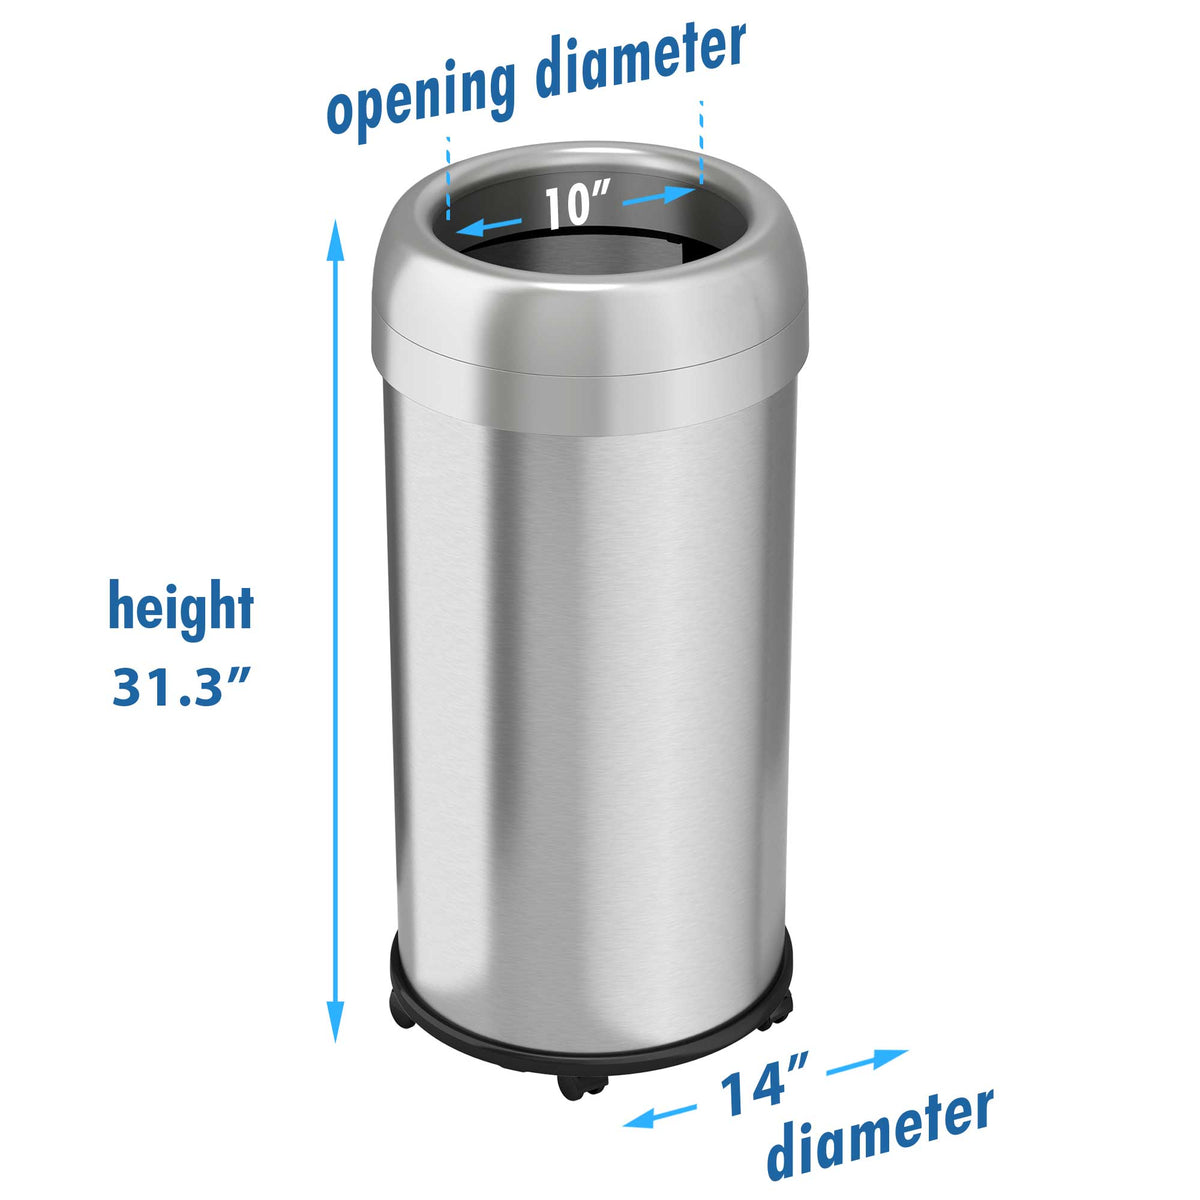 16 Gallon / 60 Liter Round Open Top Trash Can with Wheels dimensions